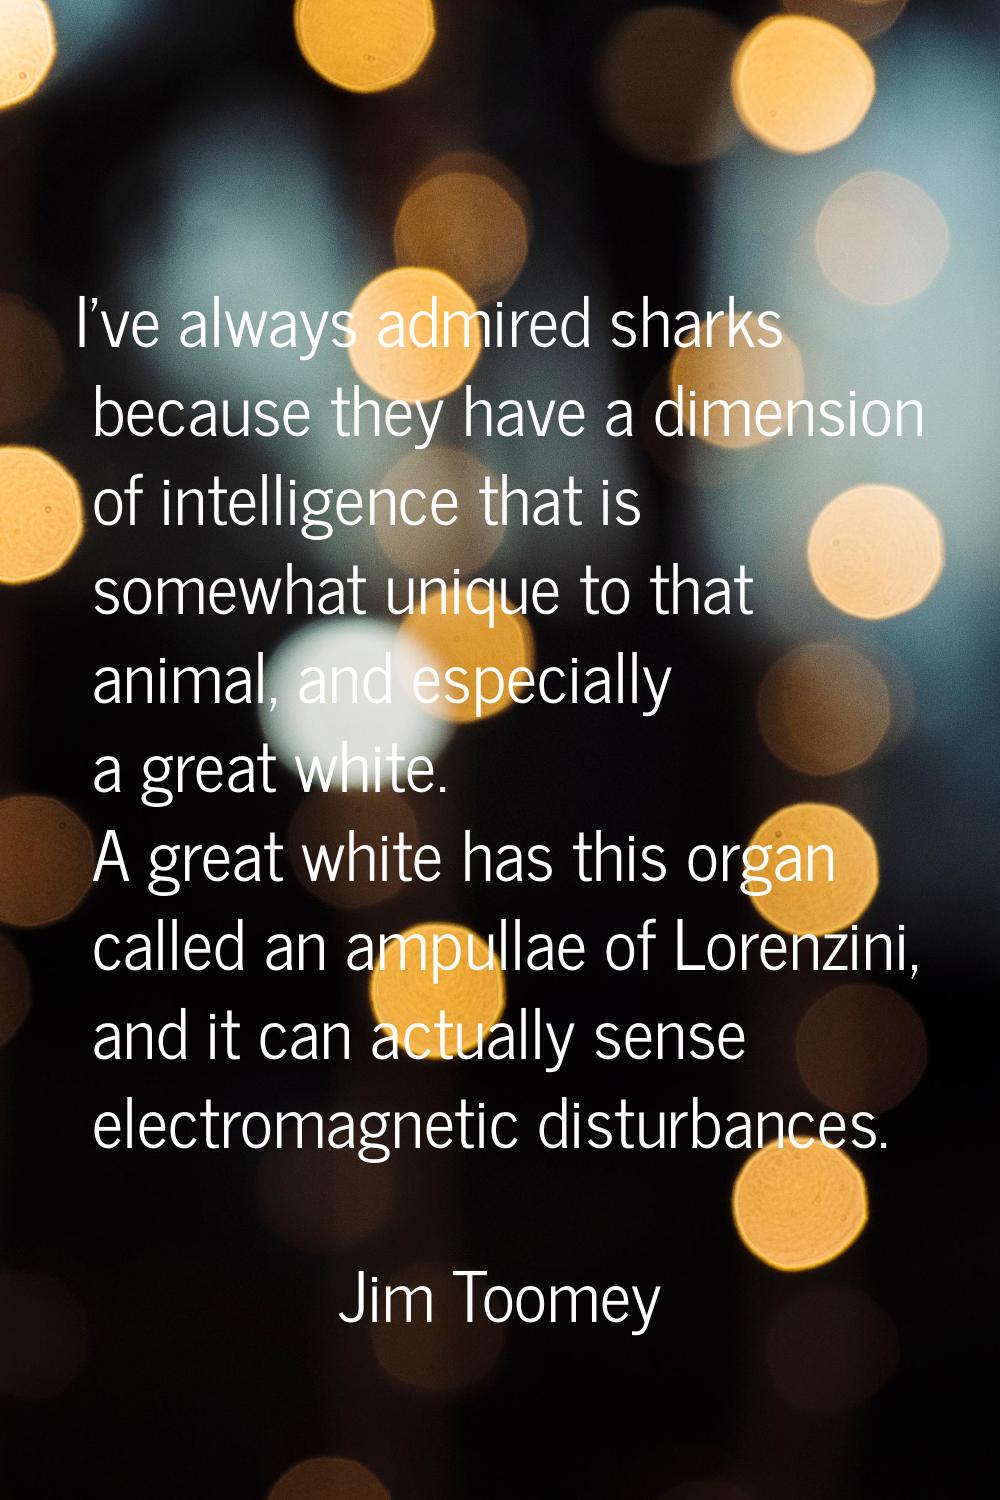 I've always admired sharks because they have a dimension of intelligence that is somewhat unique to